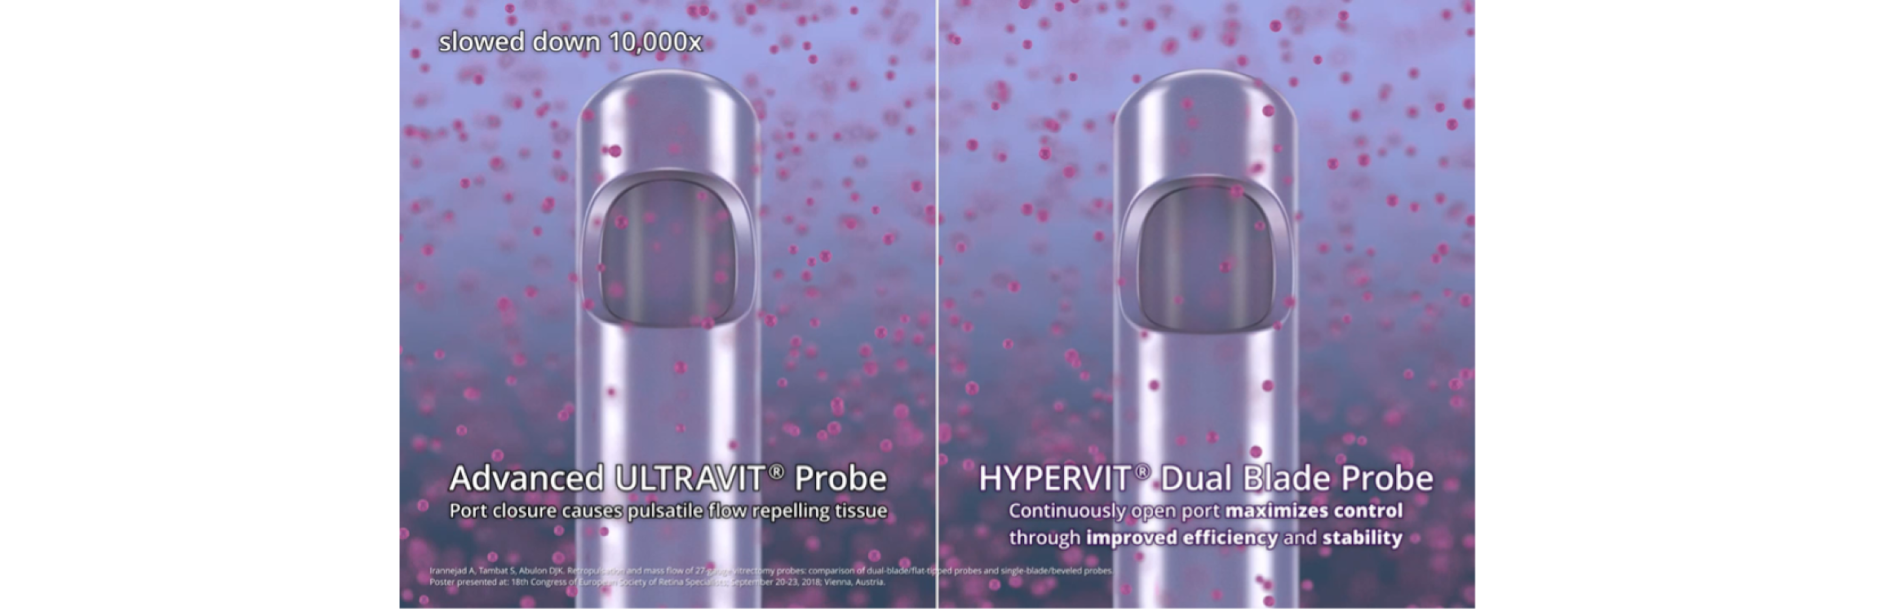 A computer-generated image showing the Advanced ULTRAVIT Probe tip on the left with text that reads, “Port closure causes pulsatile flow repelling tissue”, and the HYPERVIT Dual Blade Probe on the right with text that reads, “Continuously open port maximises control through improved efficiency and stability”. The probes are surrounded by vitreous humour to illustrate vitreous flow. A white play button indicates this is a video.